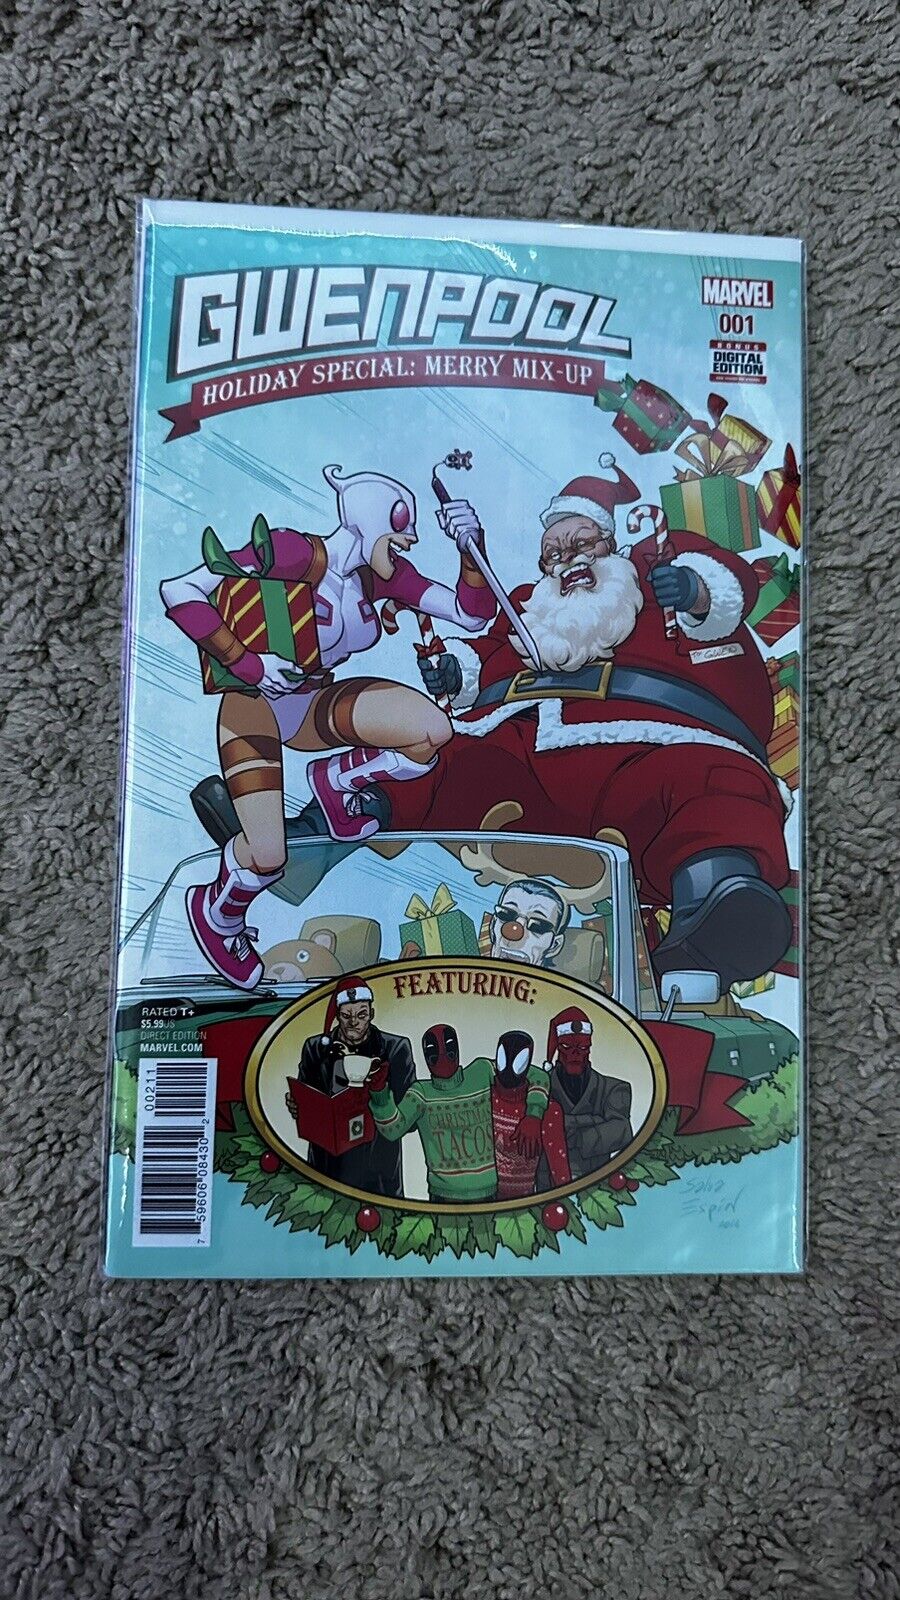 Gwenpool Holiday Special Merry Mix Up 1 Marvel Comics Deadpool Punisher 2016